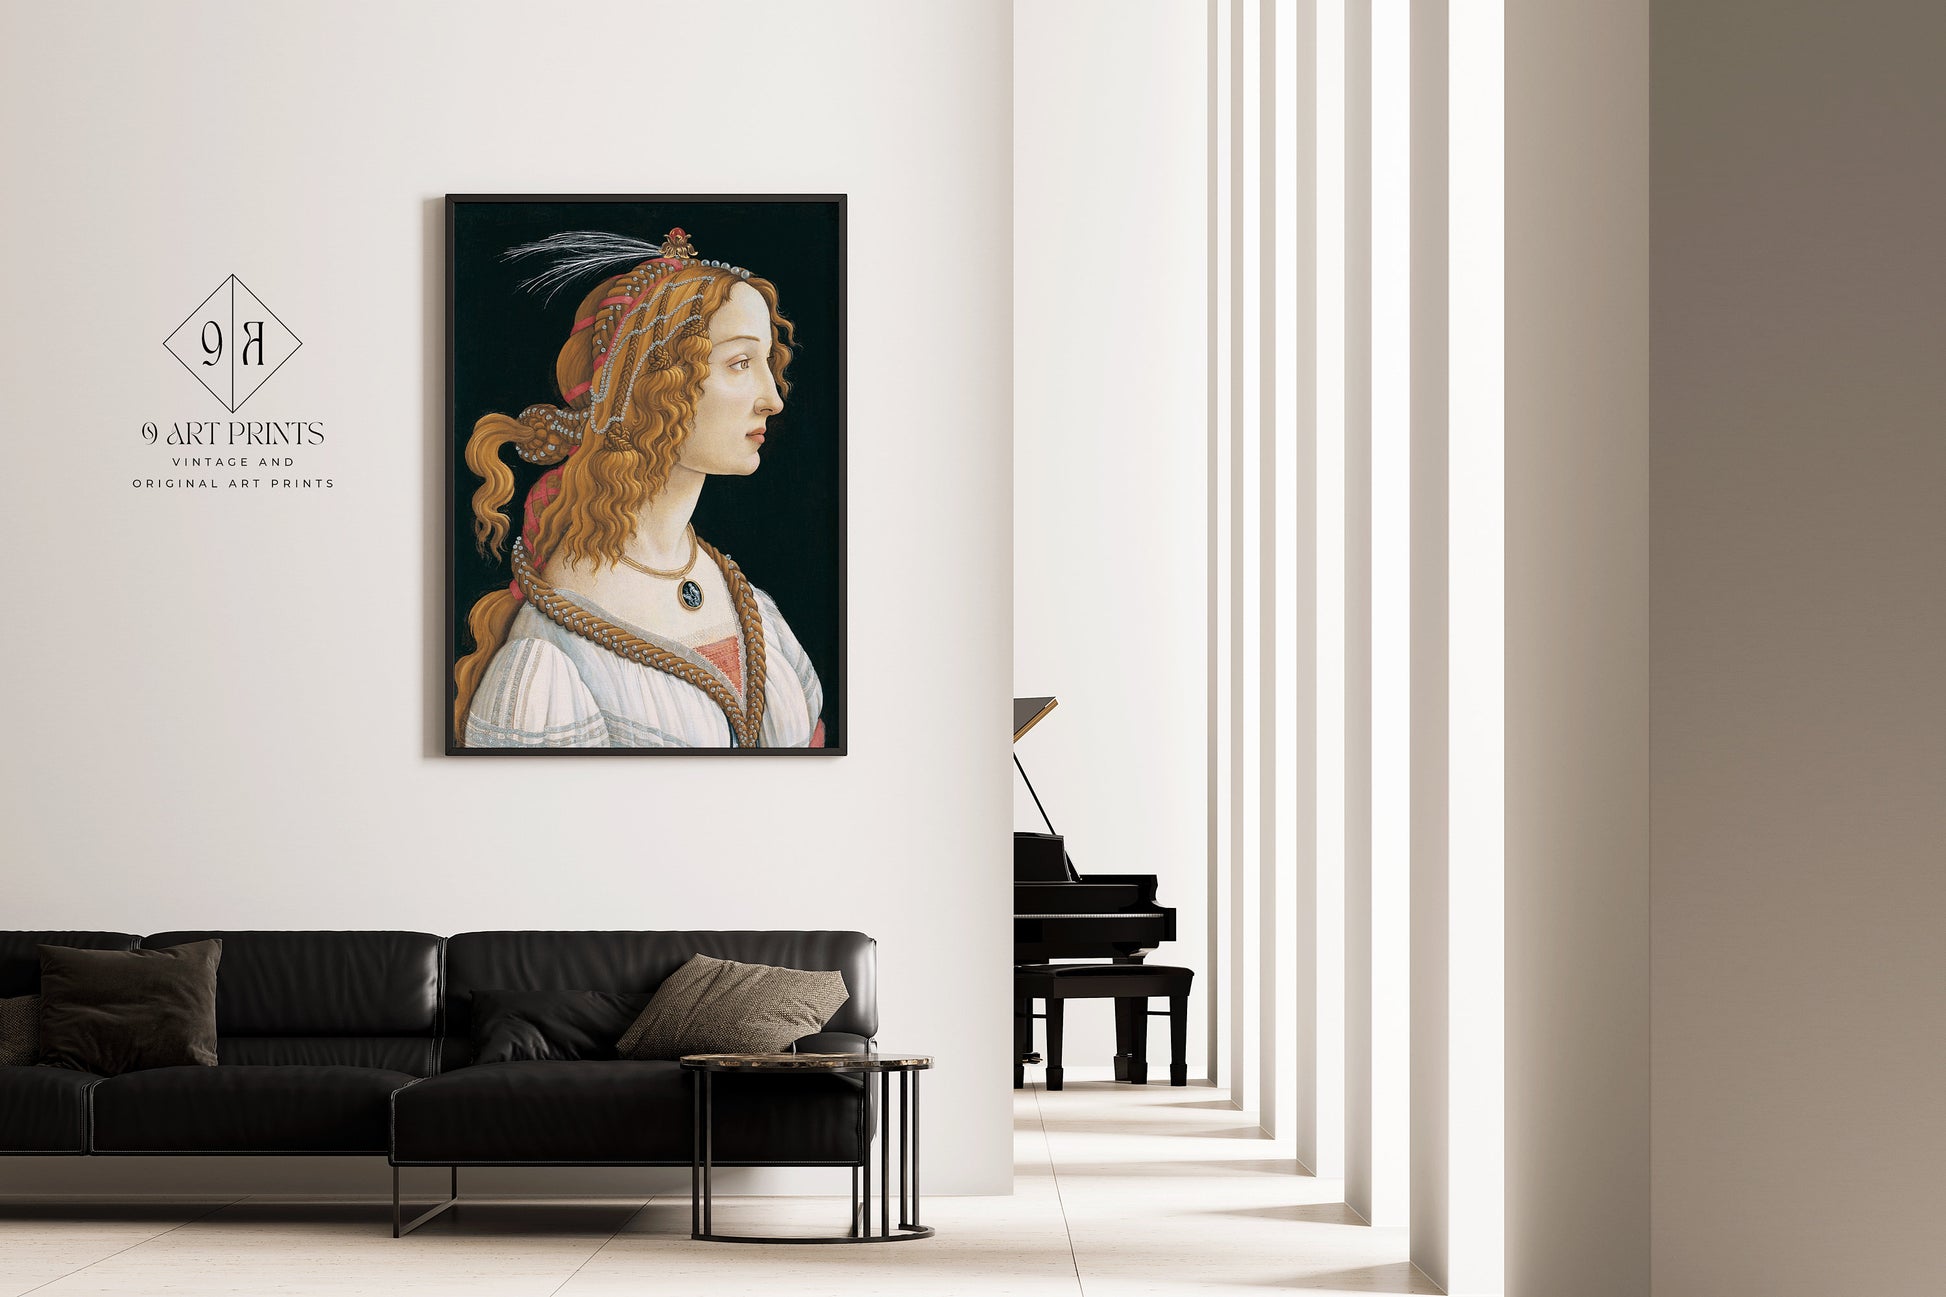 Framed Sandro Botticelli Idealized Portrait of a Lady Fine Art Renaissance Iconic Classic Vintage Painting Ready to hang Home Office Decor